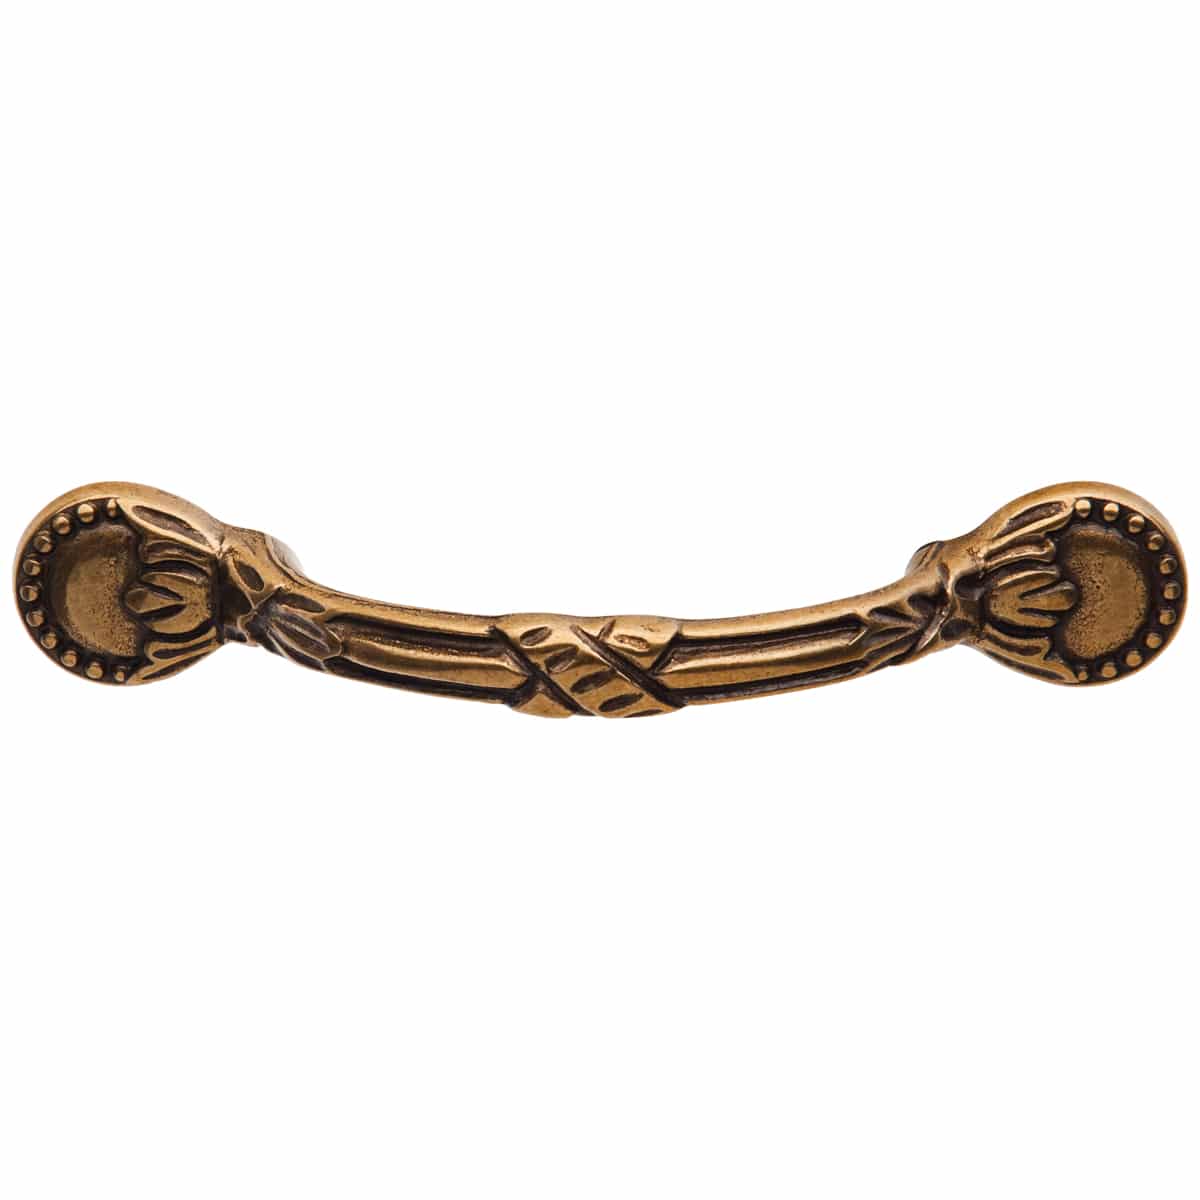 Detailed Handle Antique Brass 64mm